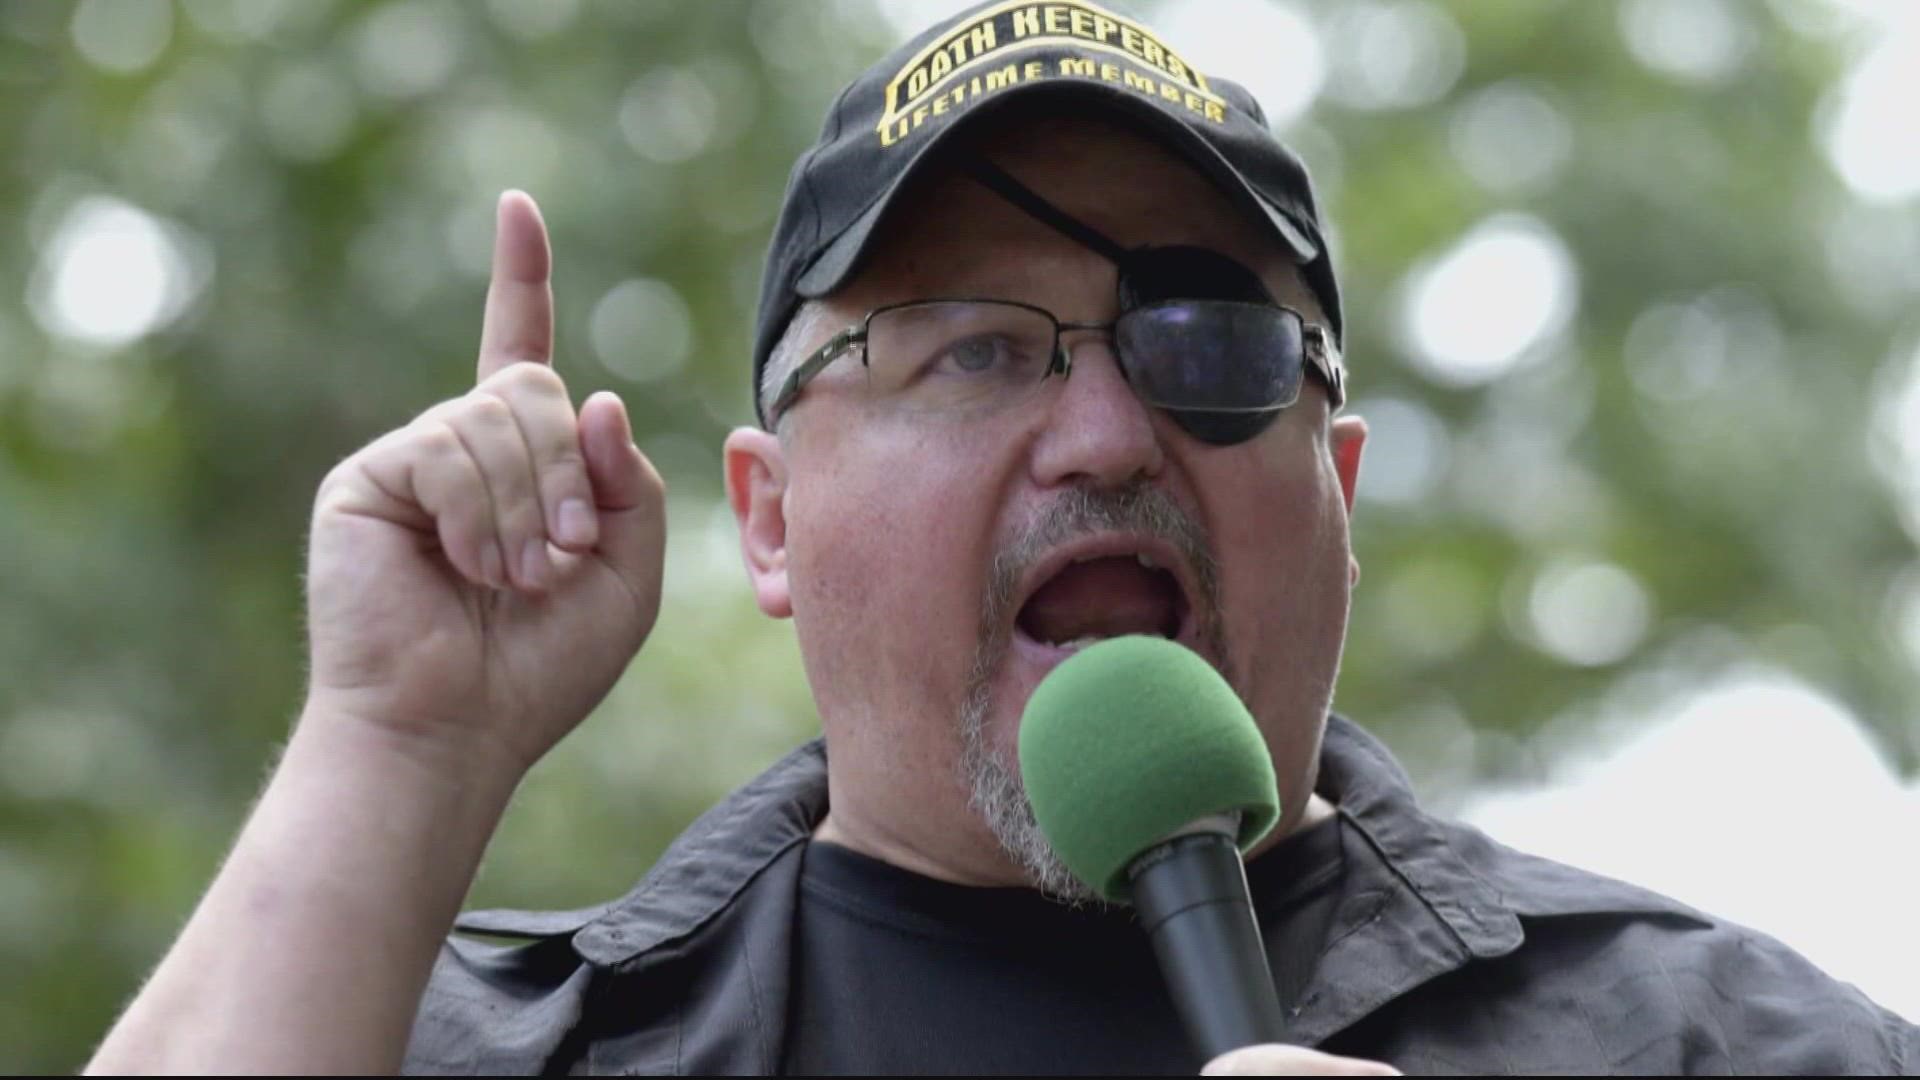 A federal judge ordered Stewart Rhodes, the founder of the far-right Oath Keepers militia, to spend 18 years in prison.